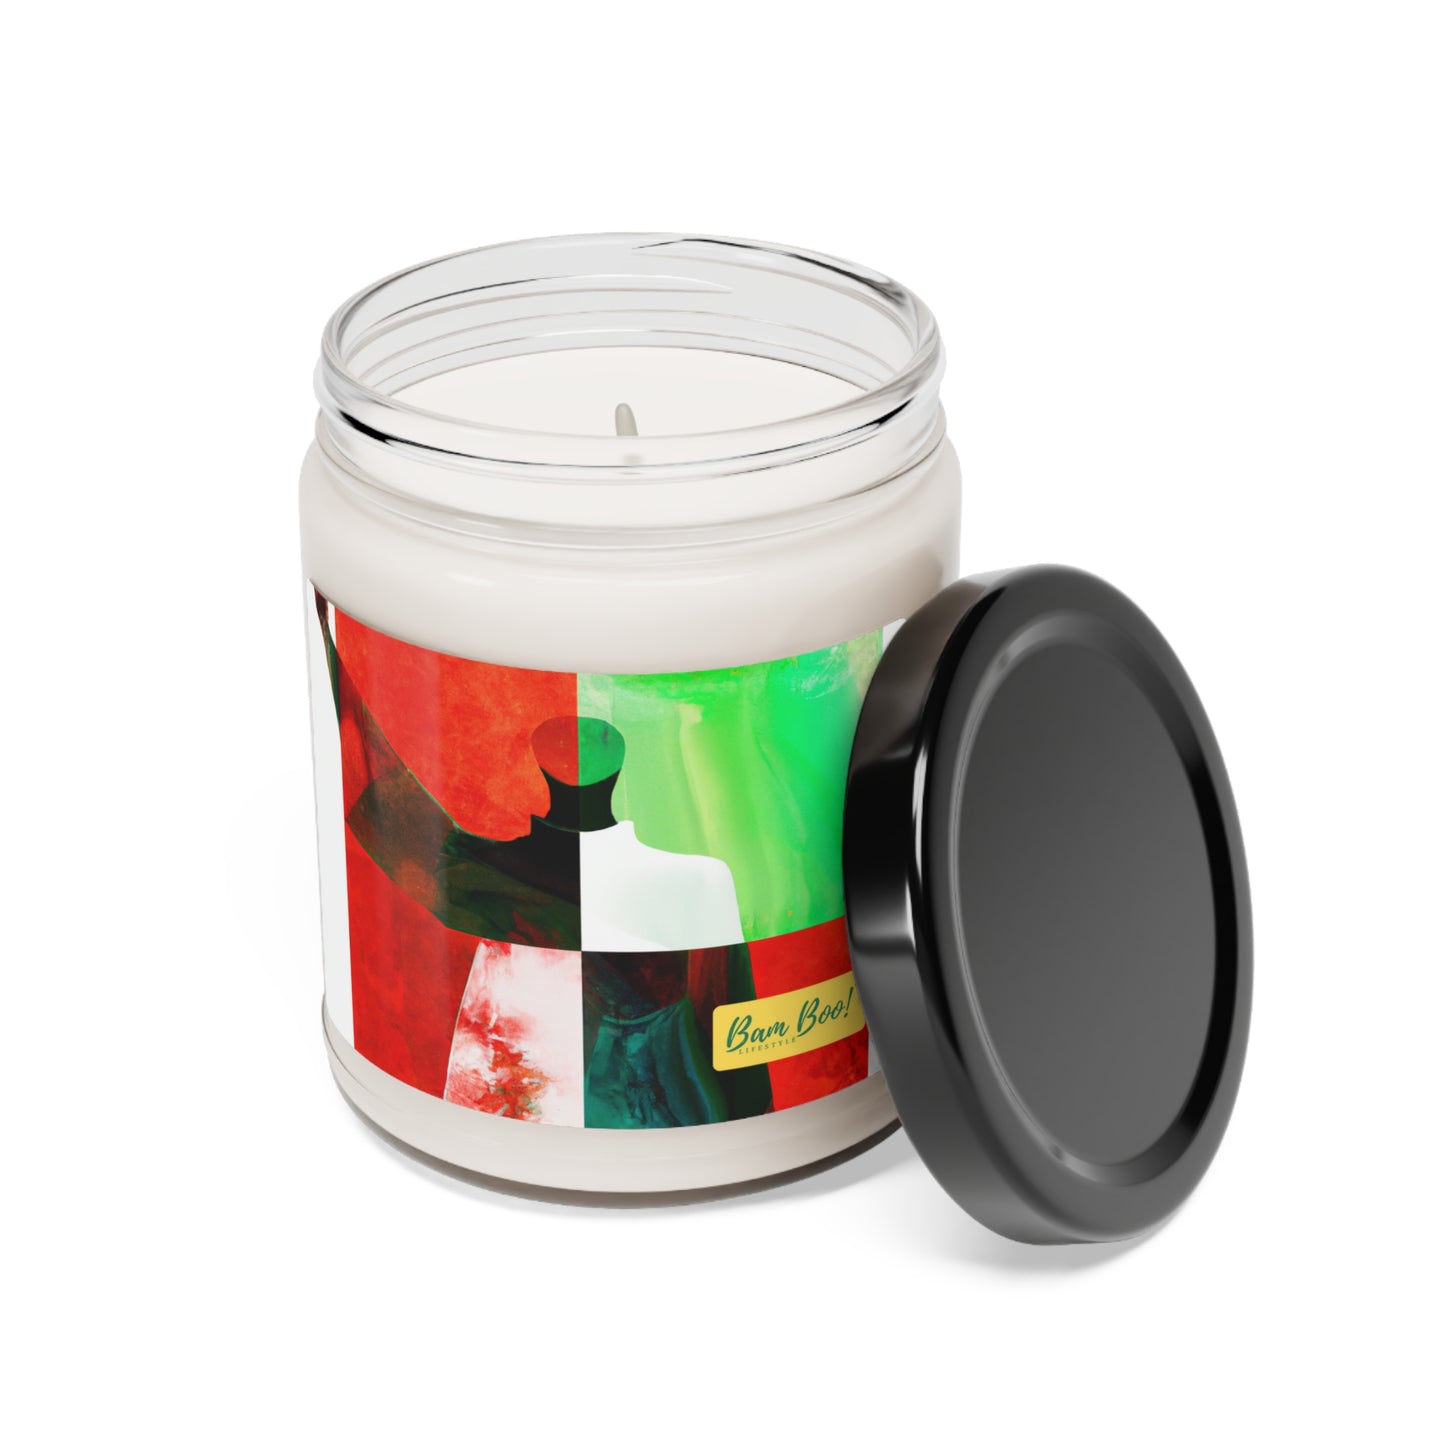 "Mosaic of Perspectives" - Bam Boo! Lifestyle Eco-friendly Soy Candle